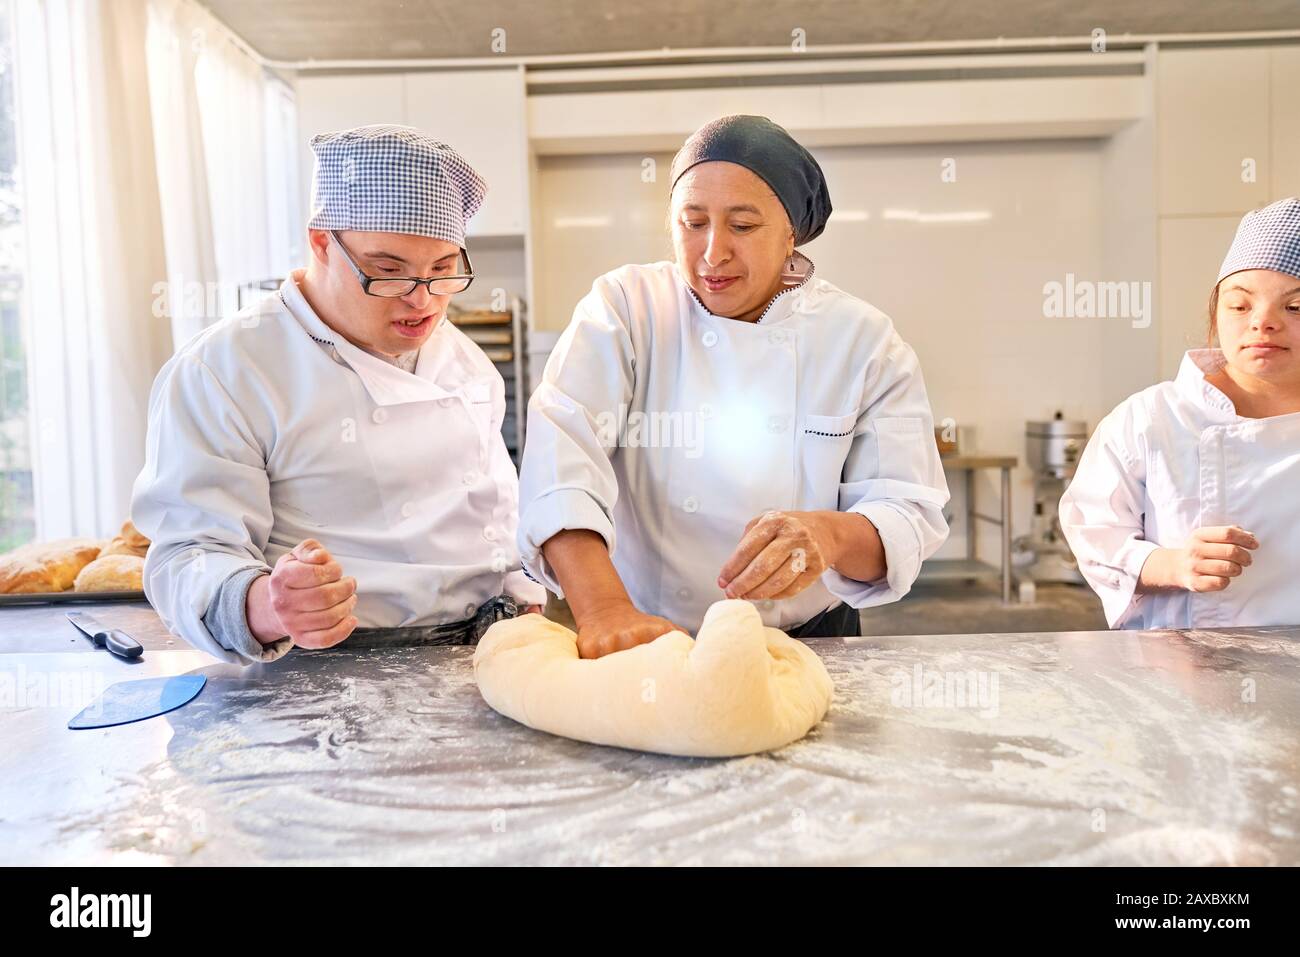 Instructor teaching students with Down Syndrome how to roll dough Stock Photo